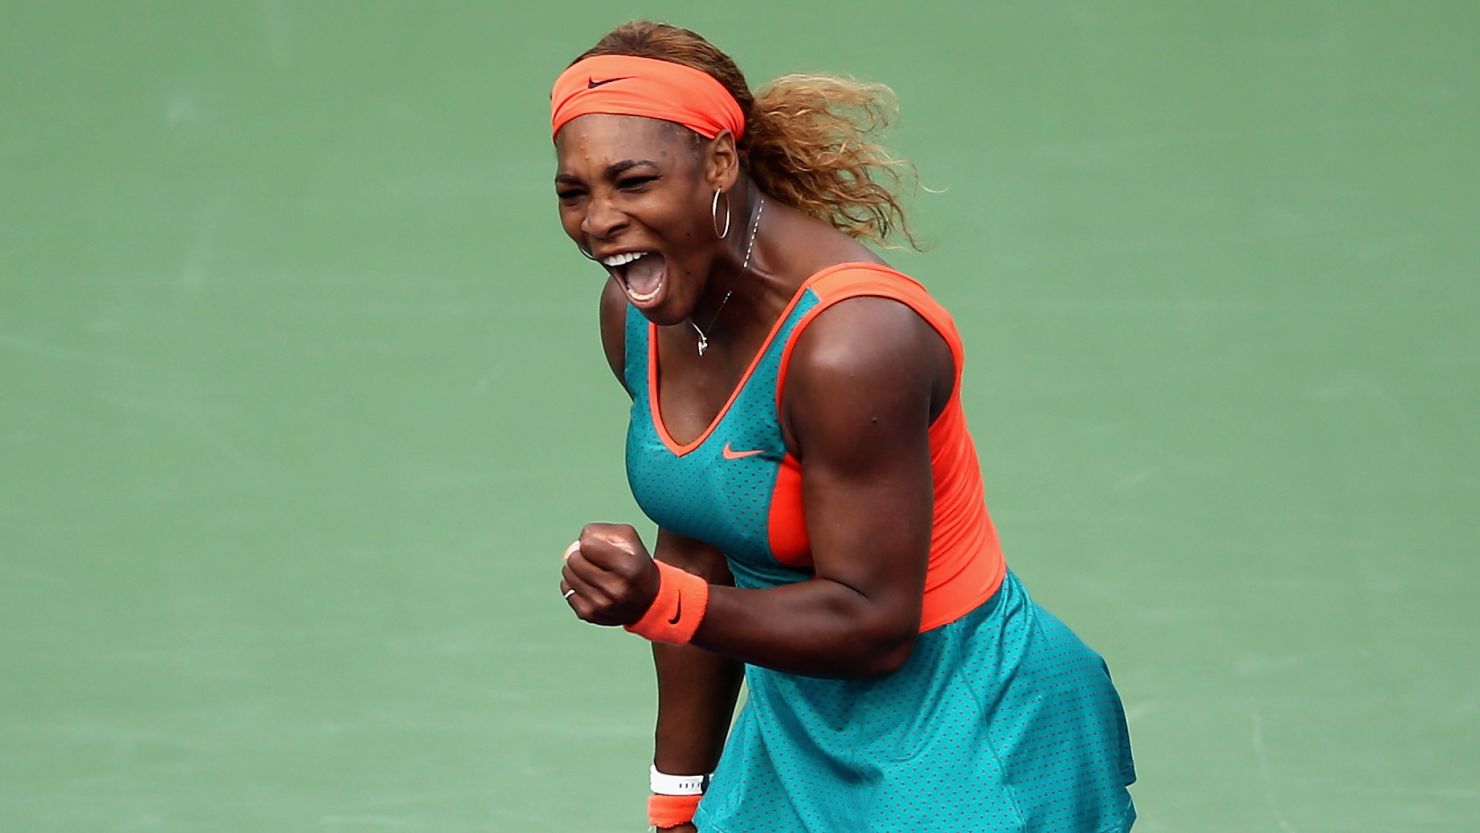 Serena Williams punches the air in delight during her semifinal match-up with Russia's Maria Sharapova.